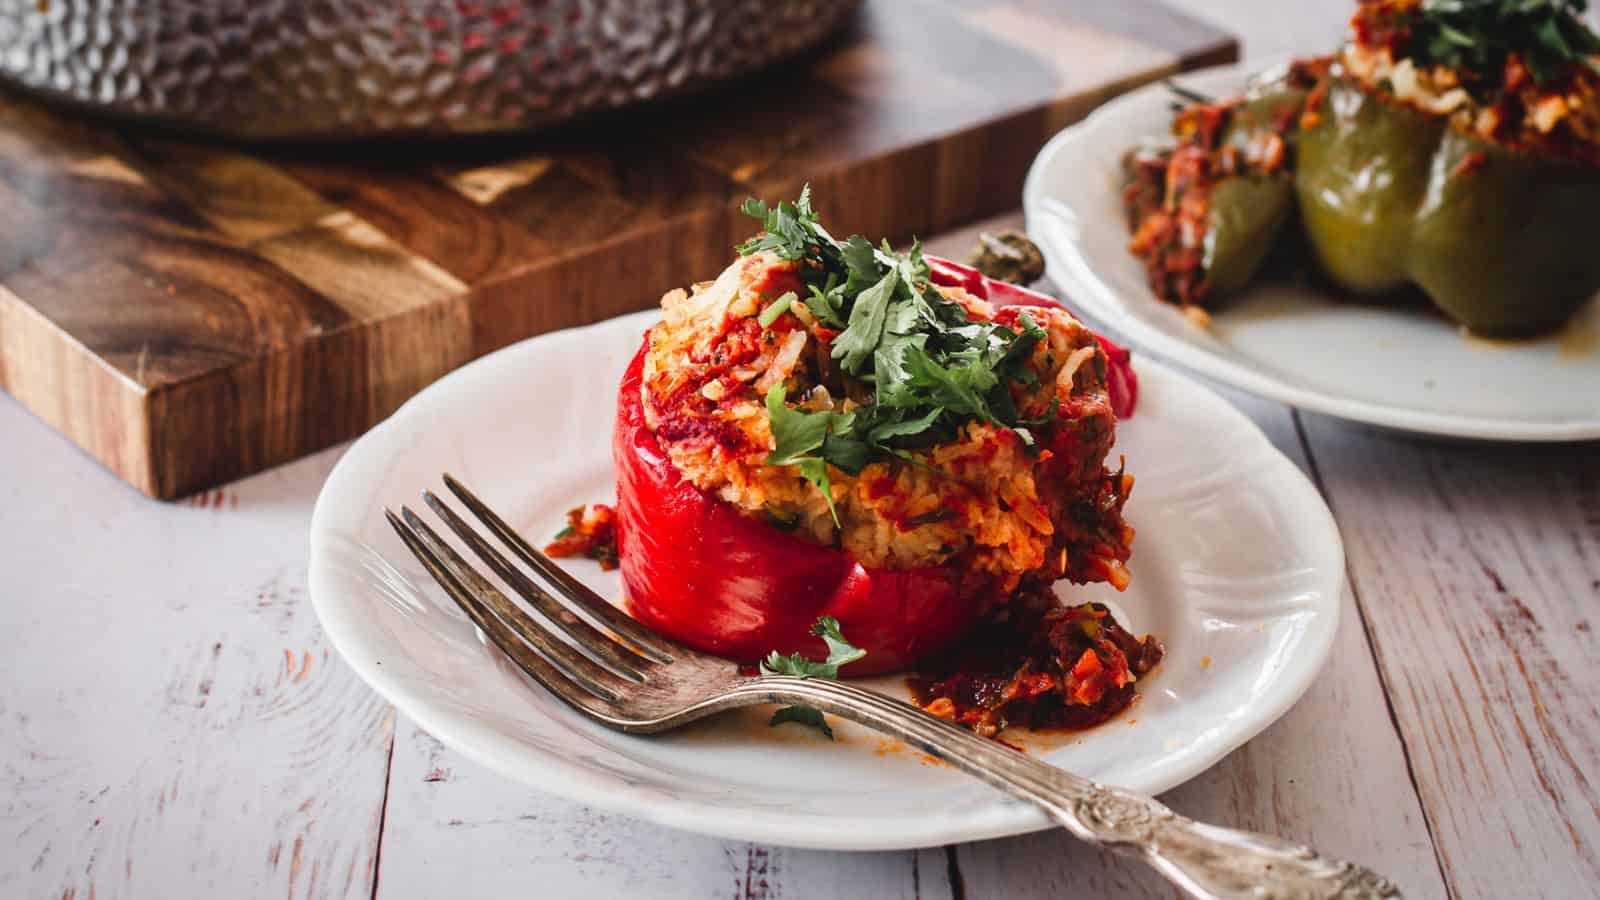 one stuffed pepper on plate with pot in background.